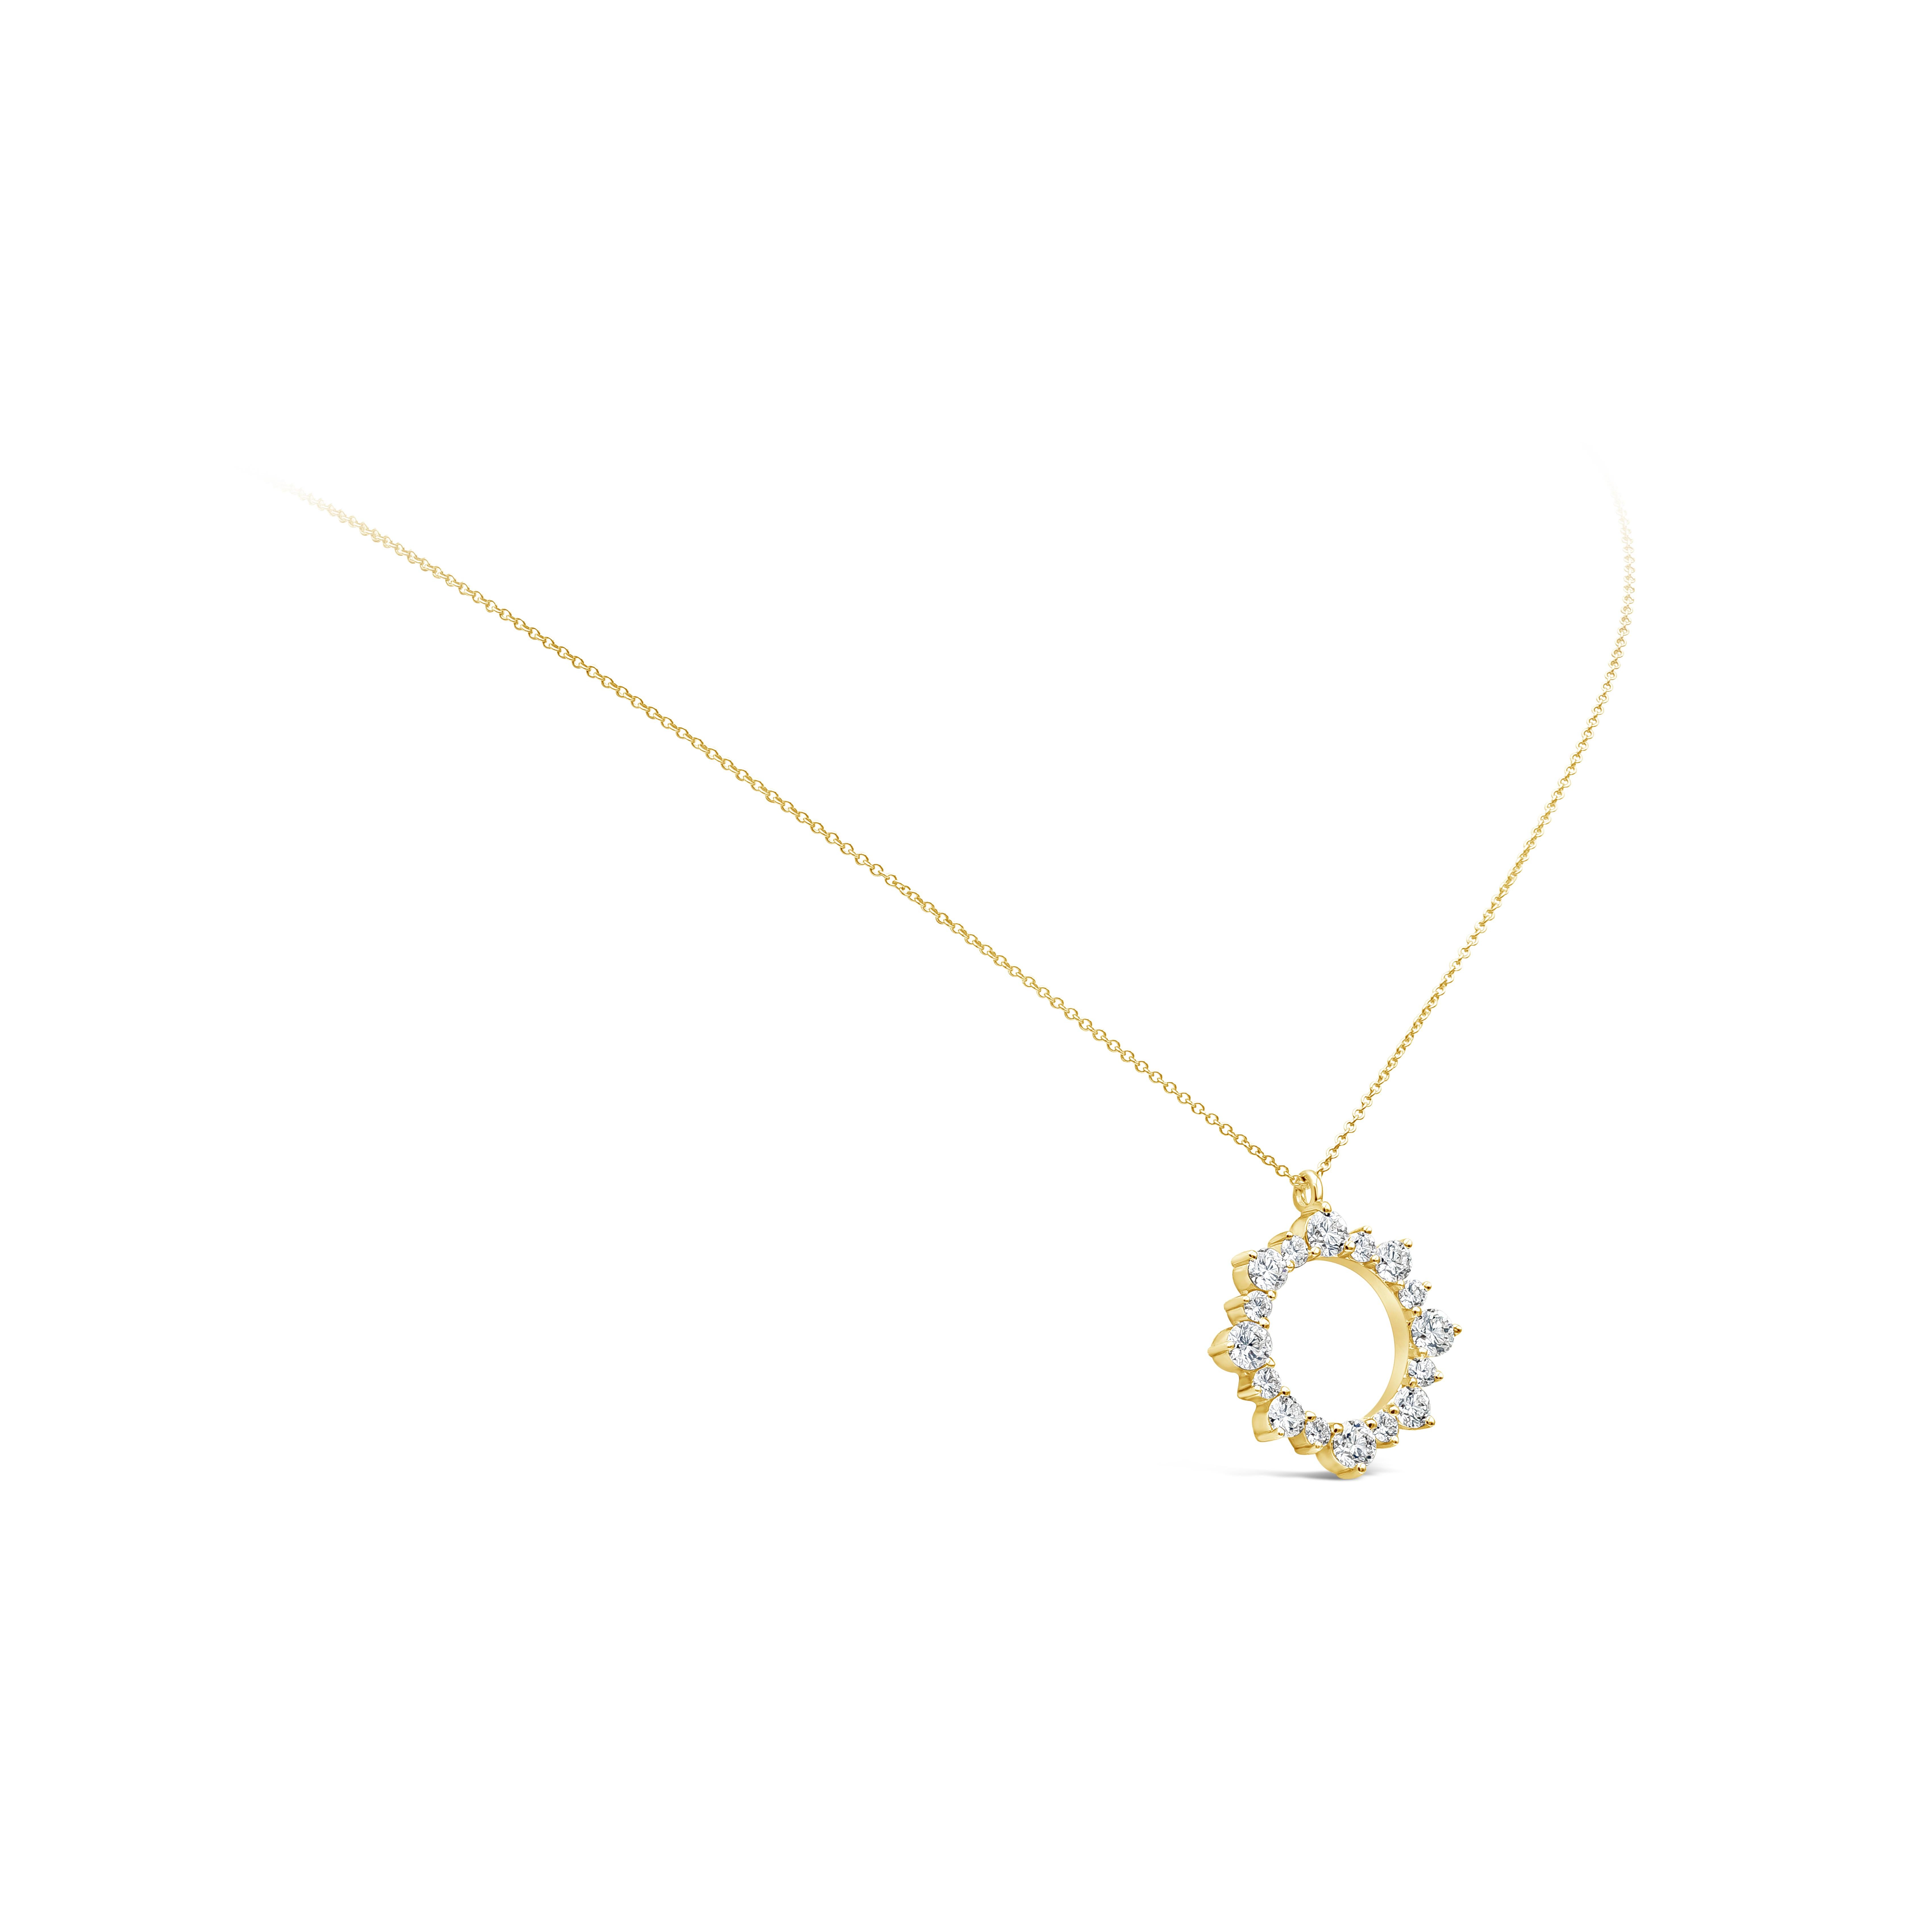 A stylish pendant necklace showcasing a row of 16 bright round diamonds,  set in an open-work, circular design. Diamonds weighs 4.10 carats total and are approximately G color, VS clarity. Made in 18K yellow gold.

Roman Malakov is a custom house,